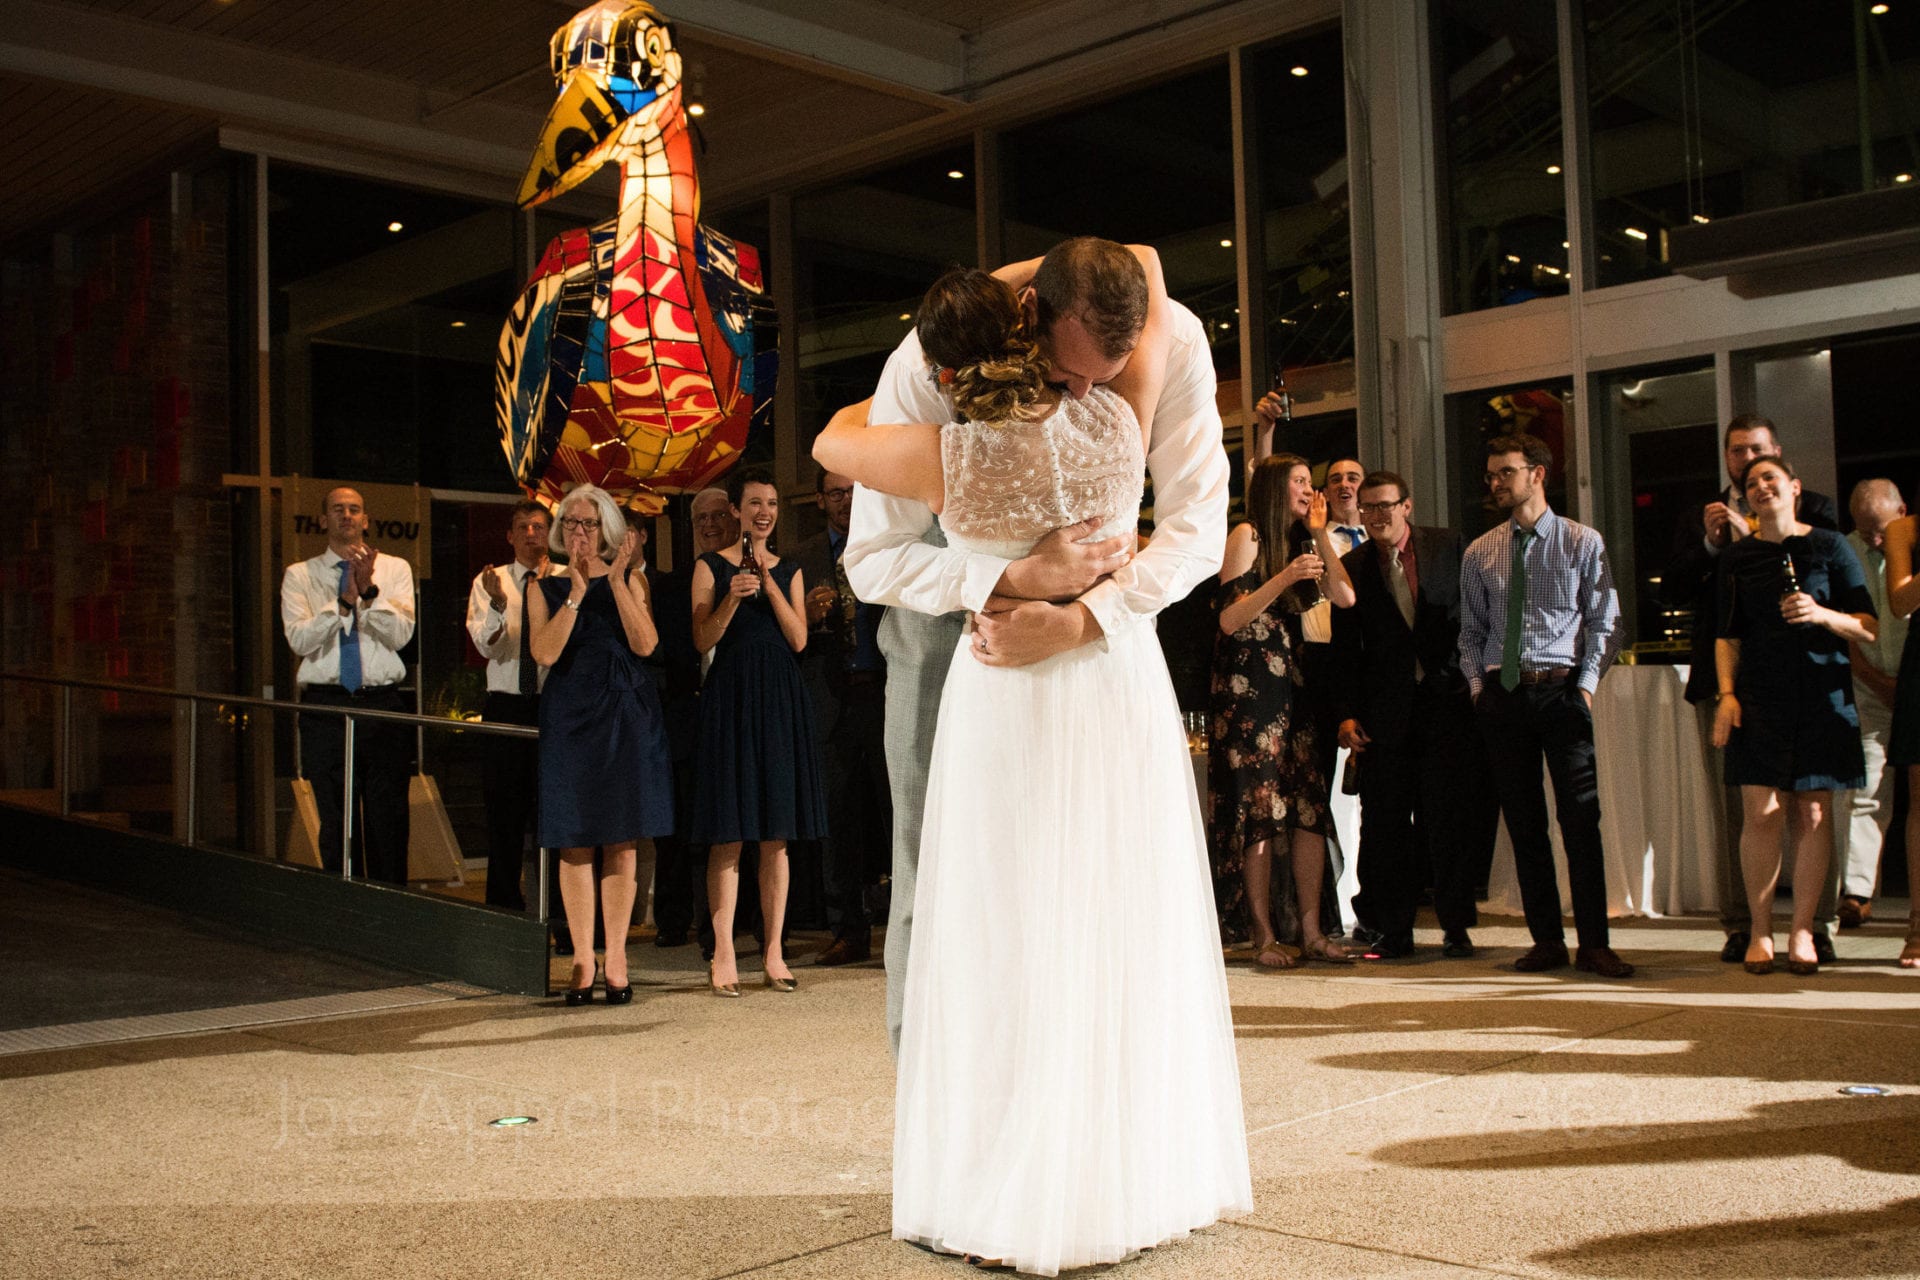 A couple embraces at the end of their first dance while their guests applaud. There is a giant colored glass bird in the background.